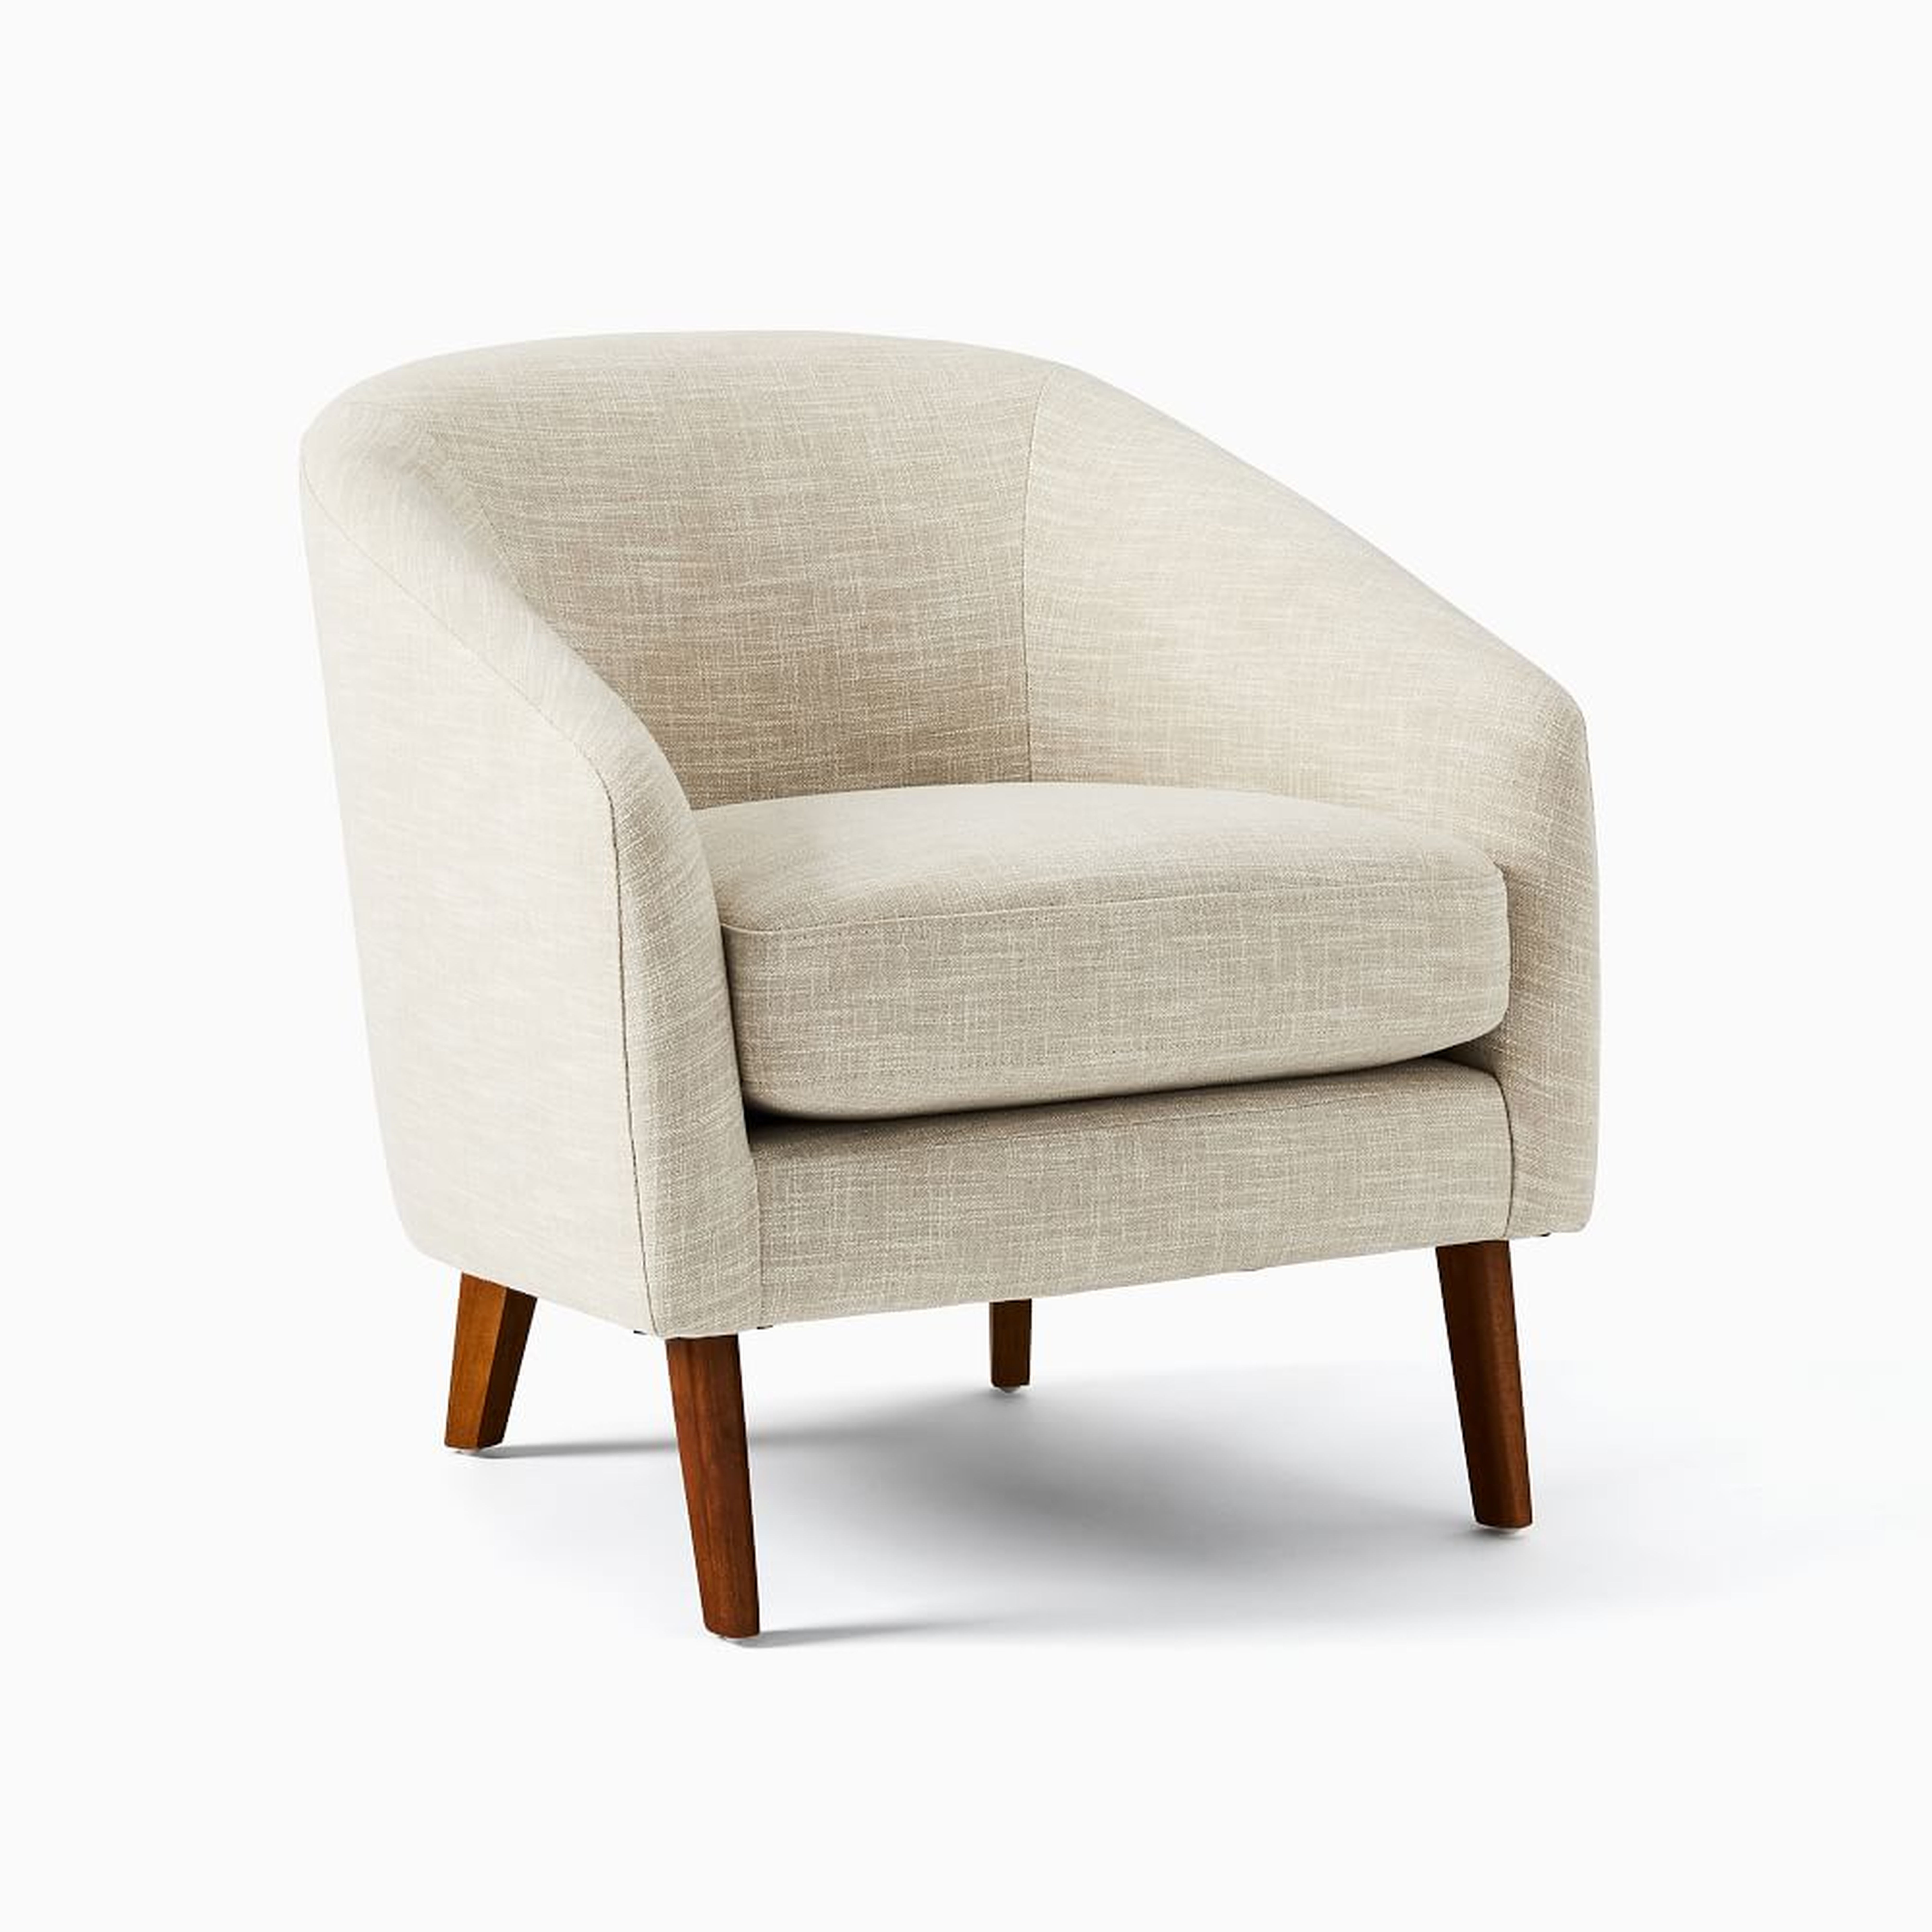 Jonah Chair, Poly, Yarn Dyed Linen Weave, Sand, Pecan - West Elm